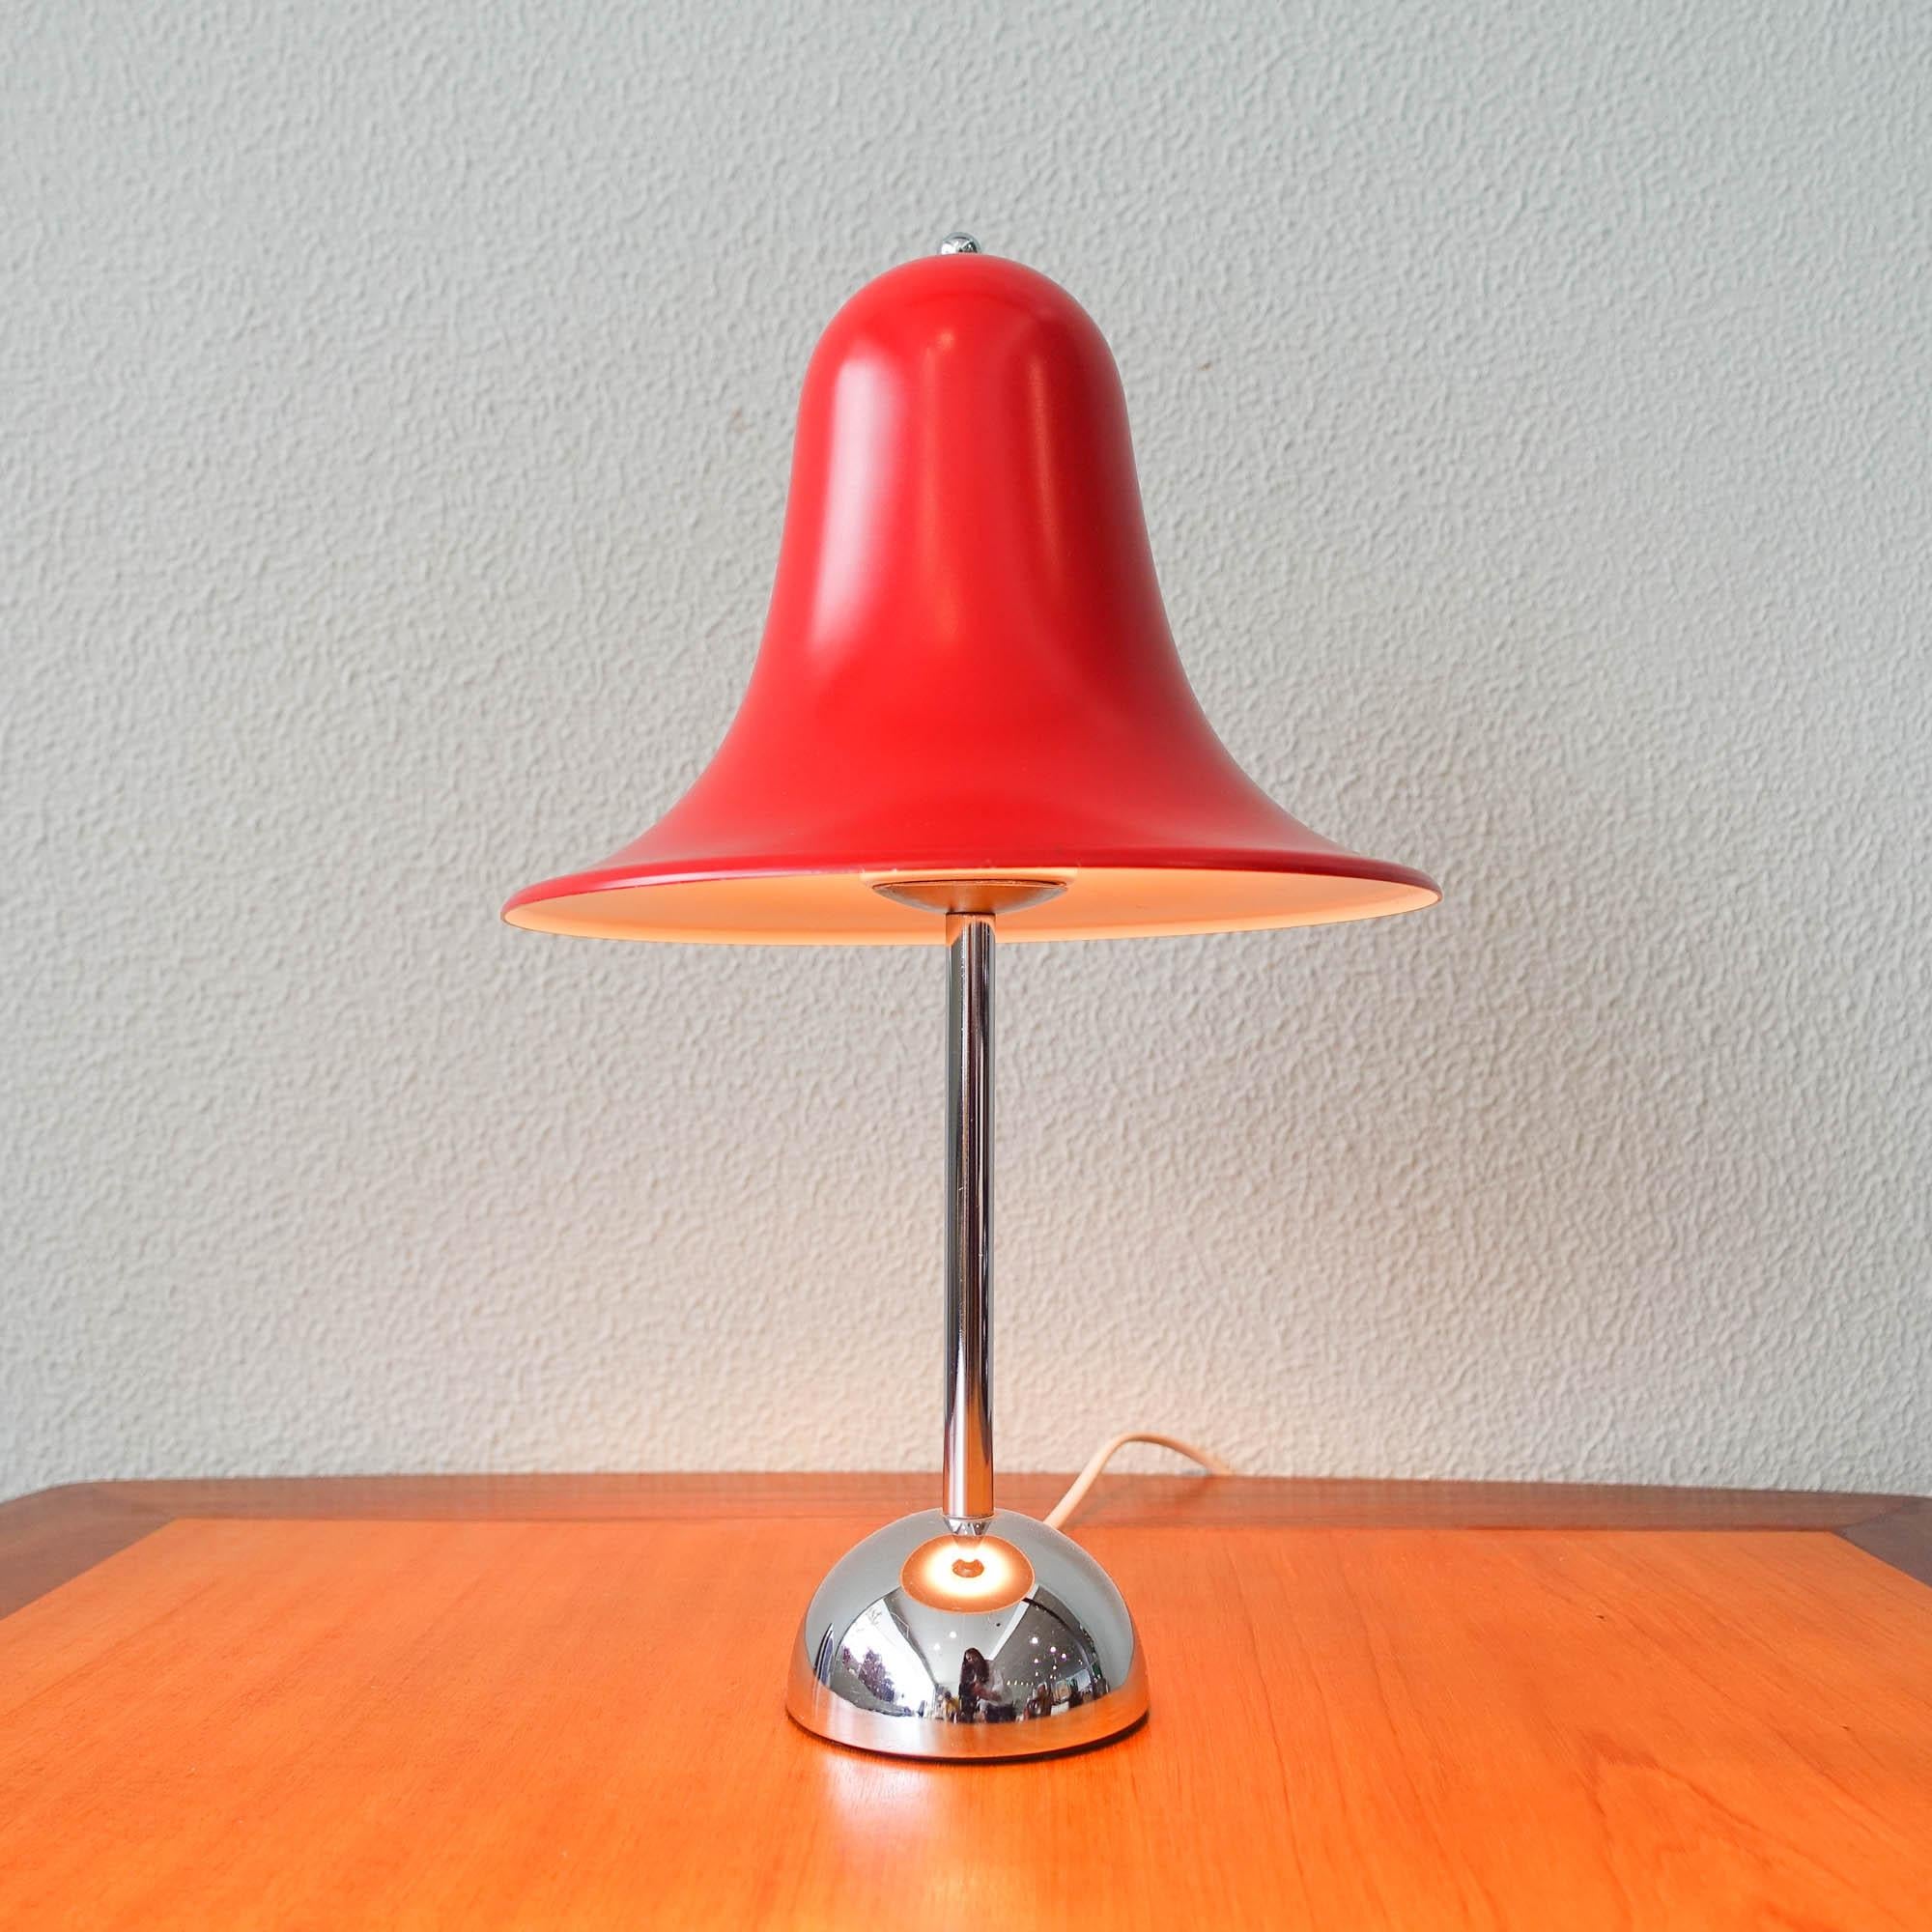 The Pantop D table lamp was designed by Verner Panton for Elteva Danmark A/S, in Denmark, during the 1980's. This lamp has a bell-shaped metal shade in red that is set in a chrome-plated base. Below is marked 